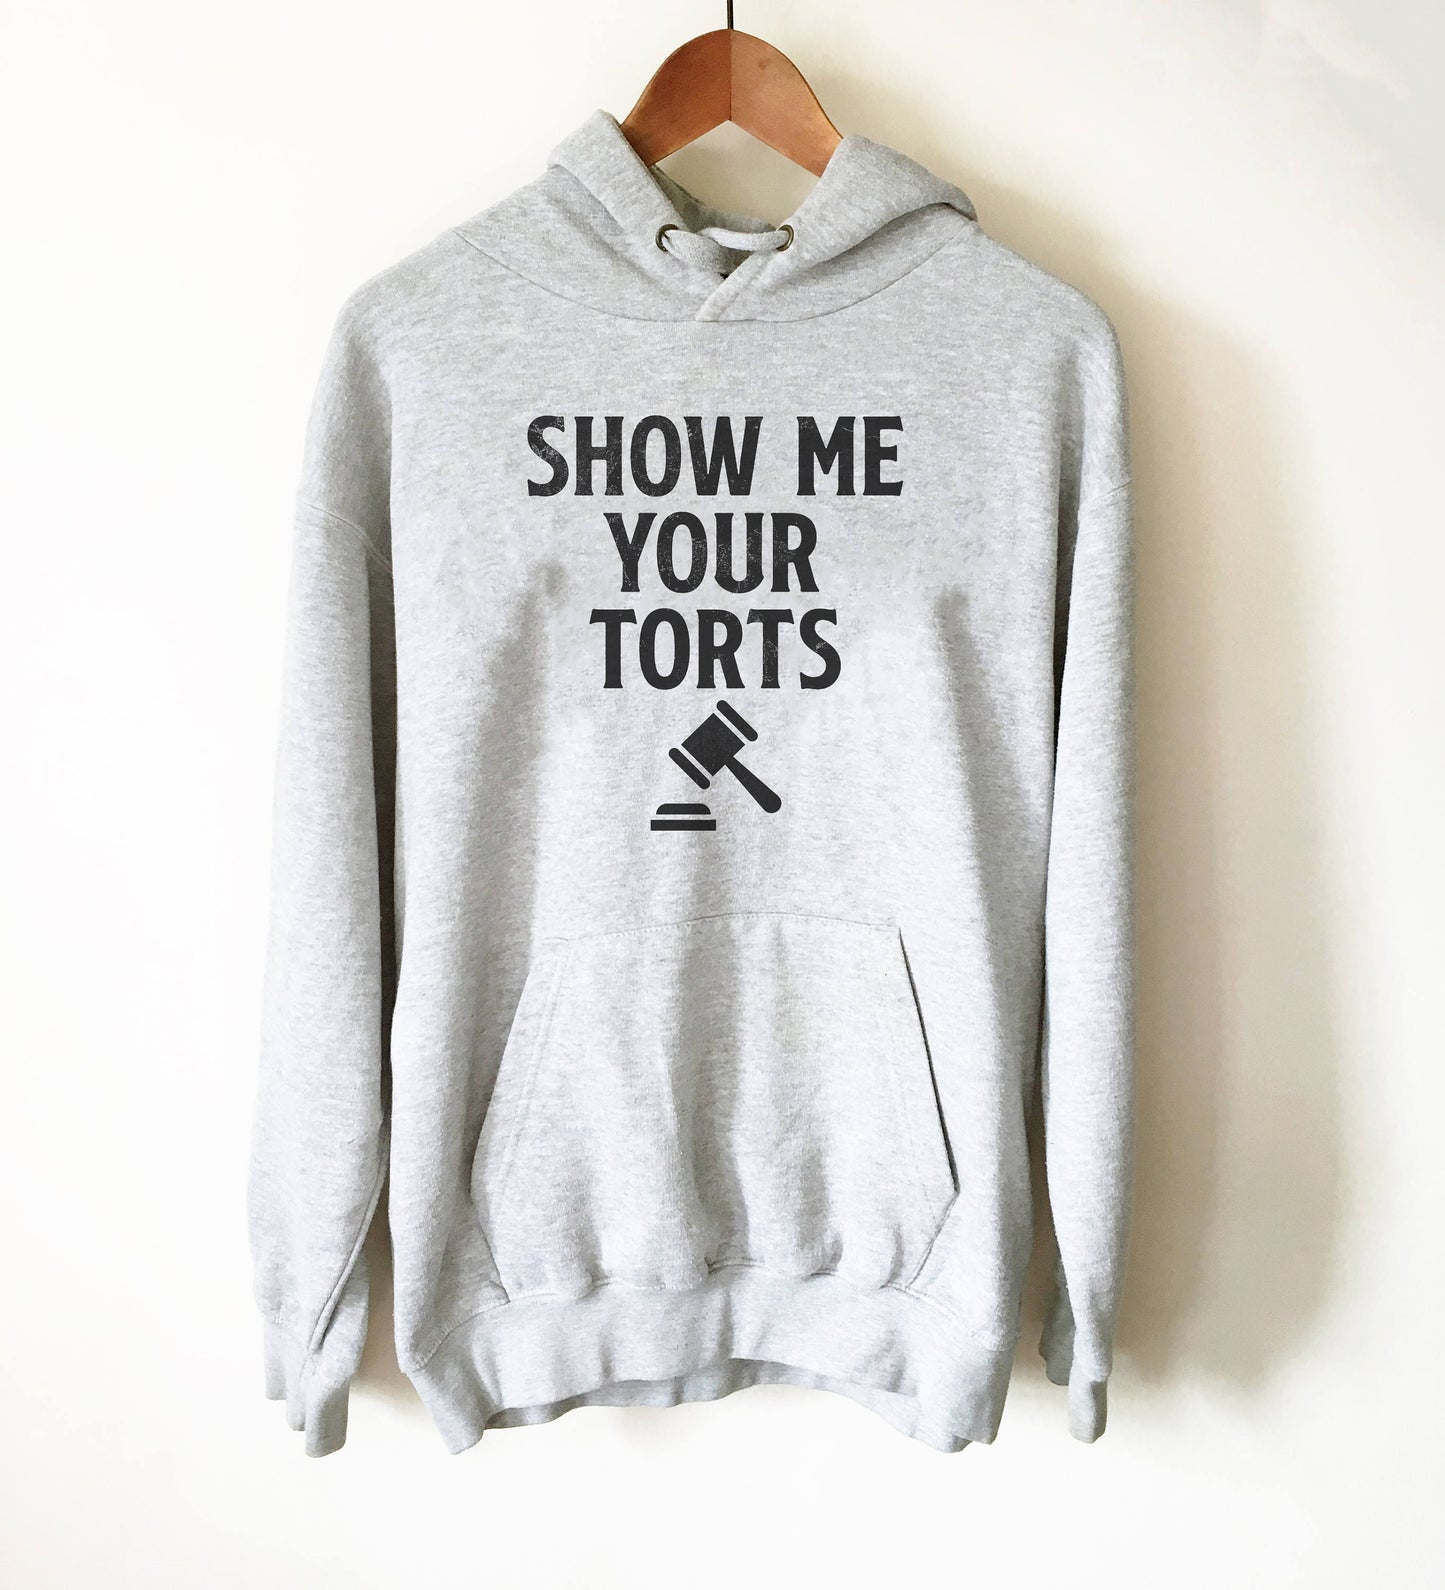 Show Me Your Torts Hoodie - Lawyer Shirt, Lawyer Gift, Law School, Attorney Shirt, Judge Shirt, Law Student, Solicitor Shirt, Graduation